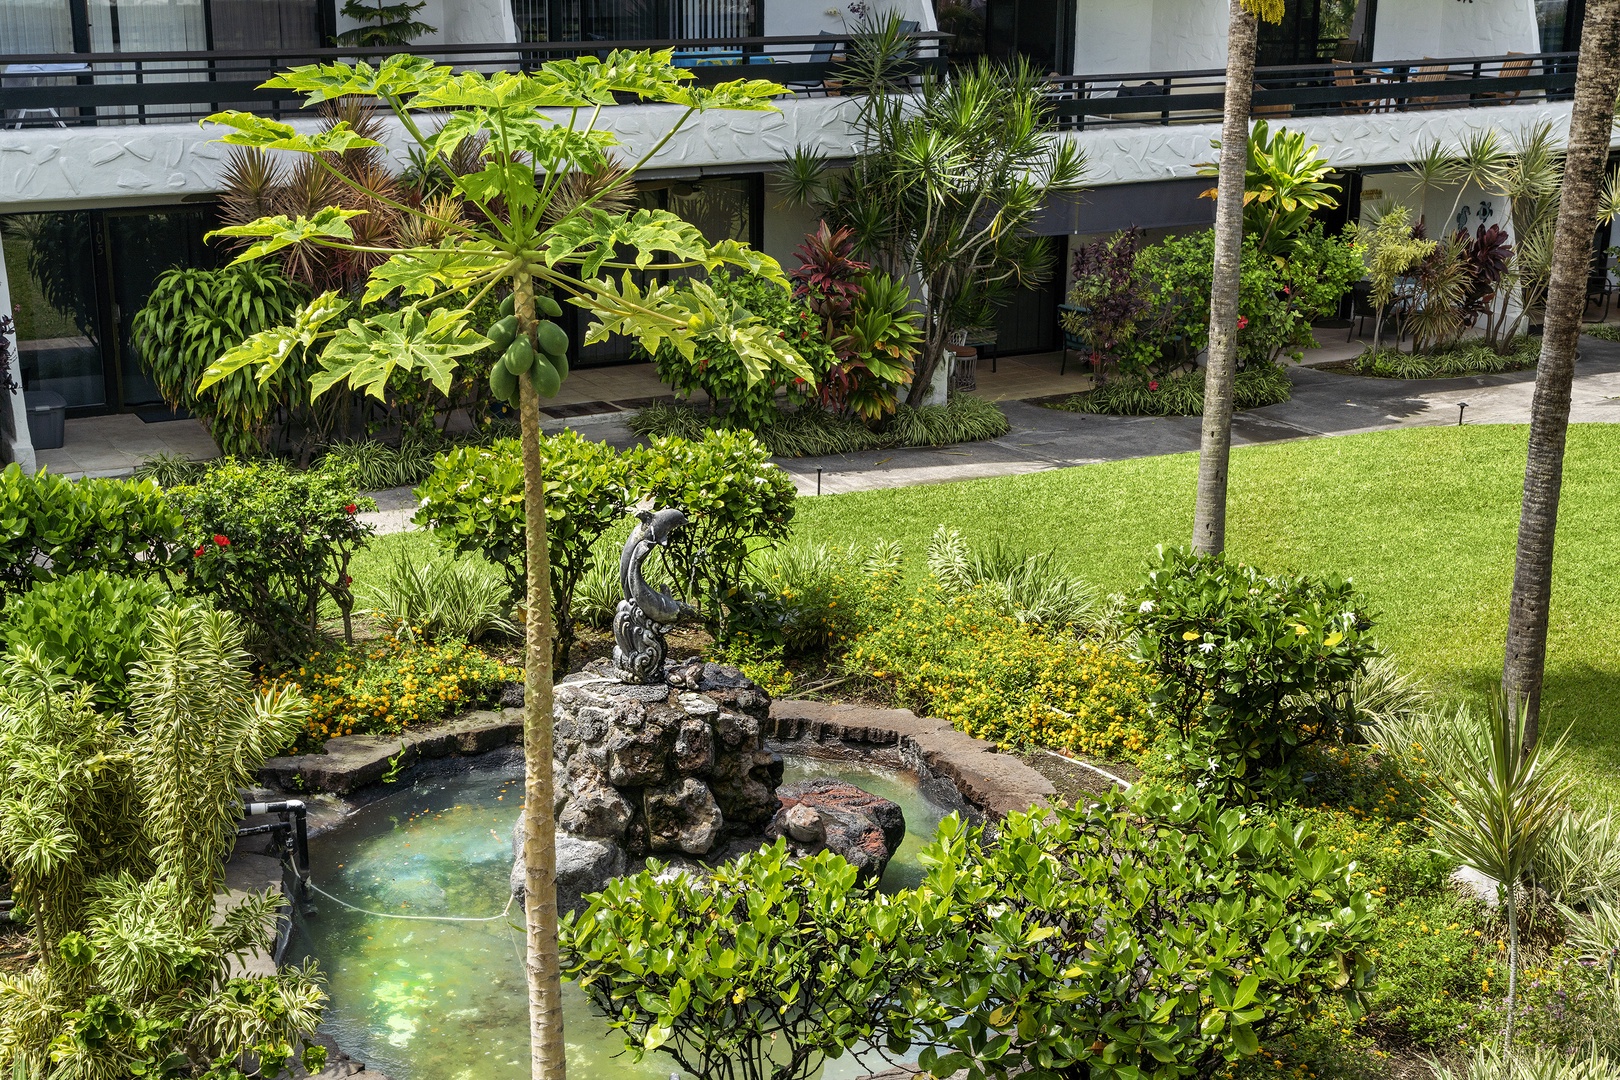 Kailua Kona Vacation Rentals, Casa De Emdeko 222 - Water feature directly in front of the condo from the Lanai